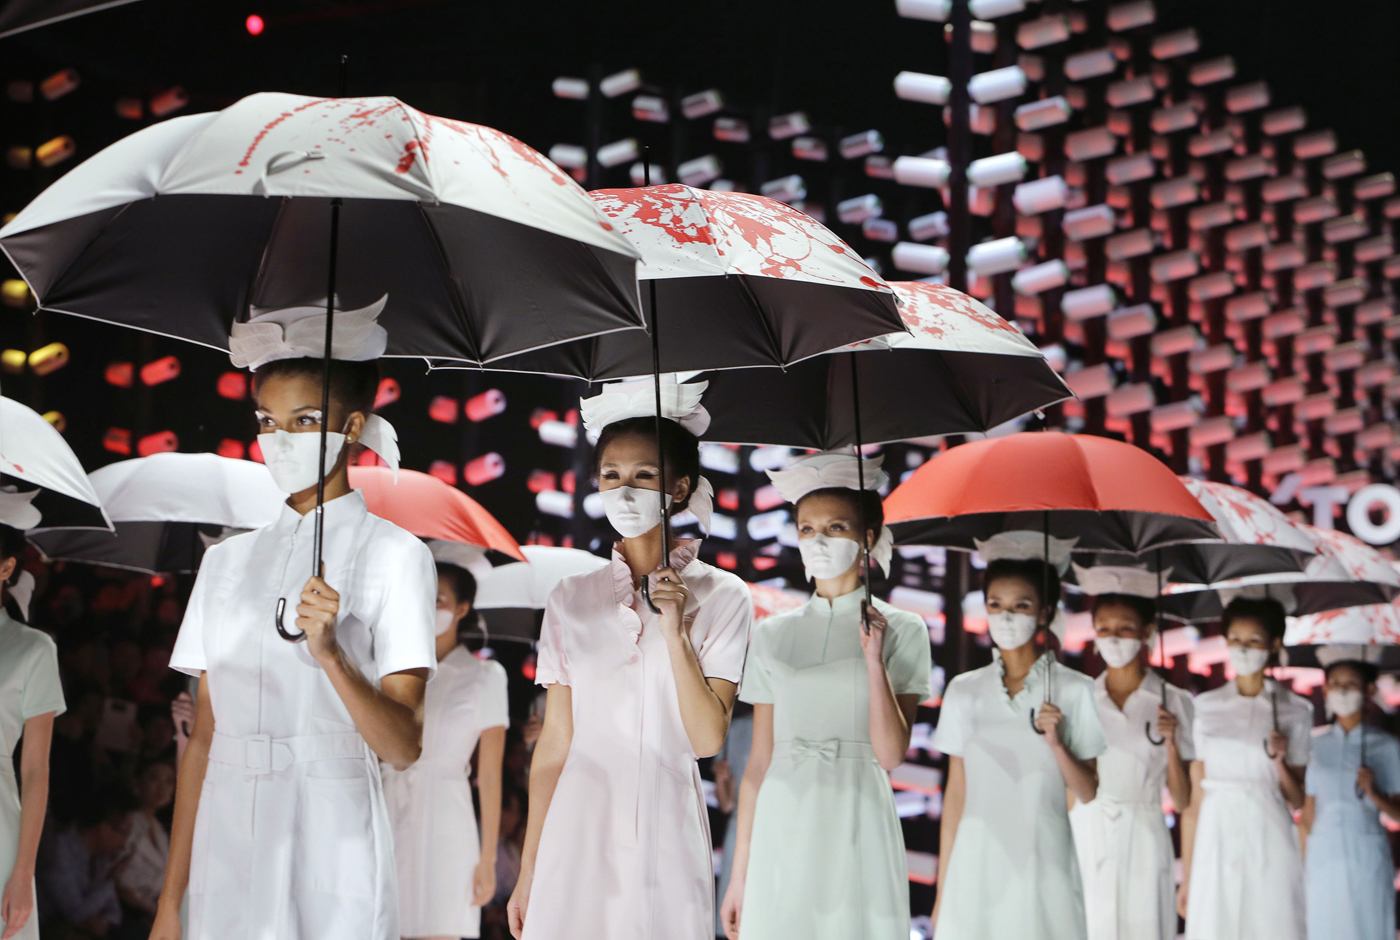 Models wearing masks hold umbrellas as they perform at Beijing Fashion Week.